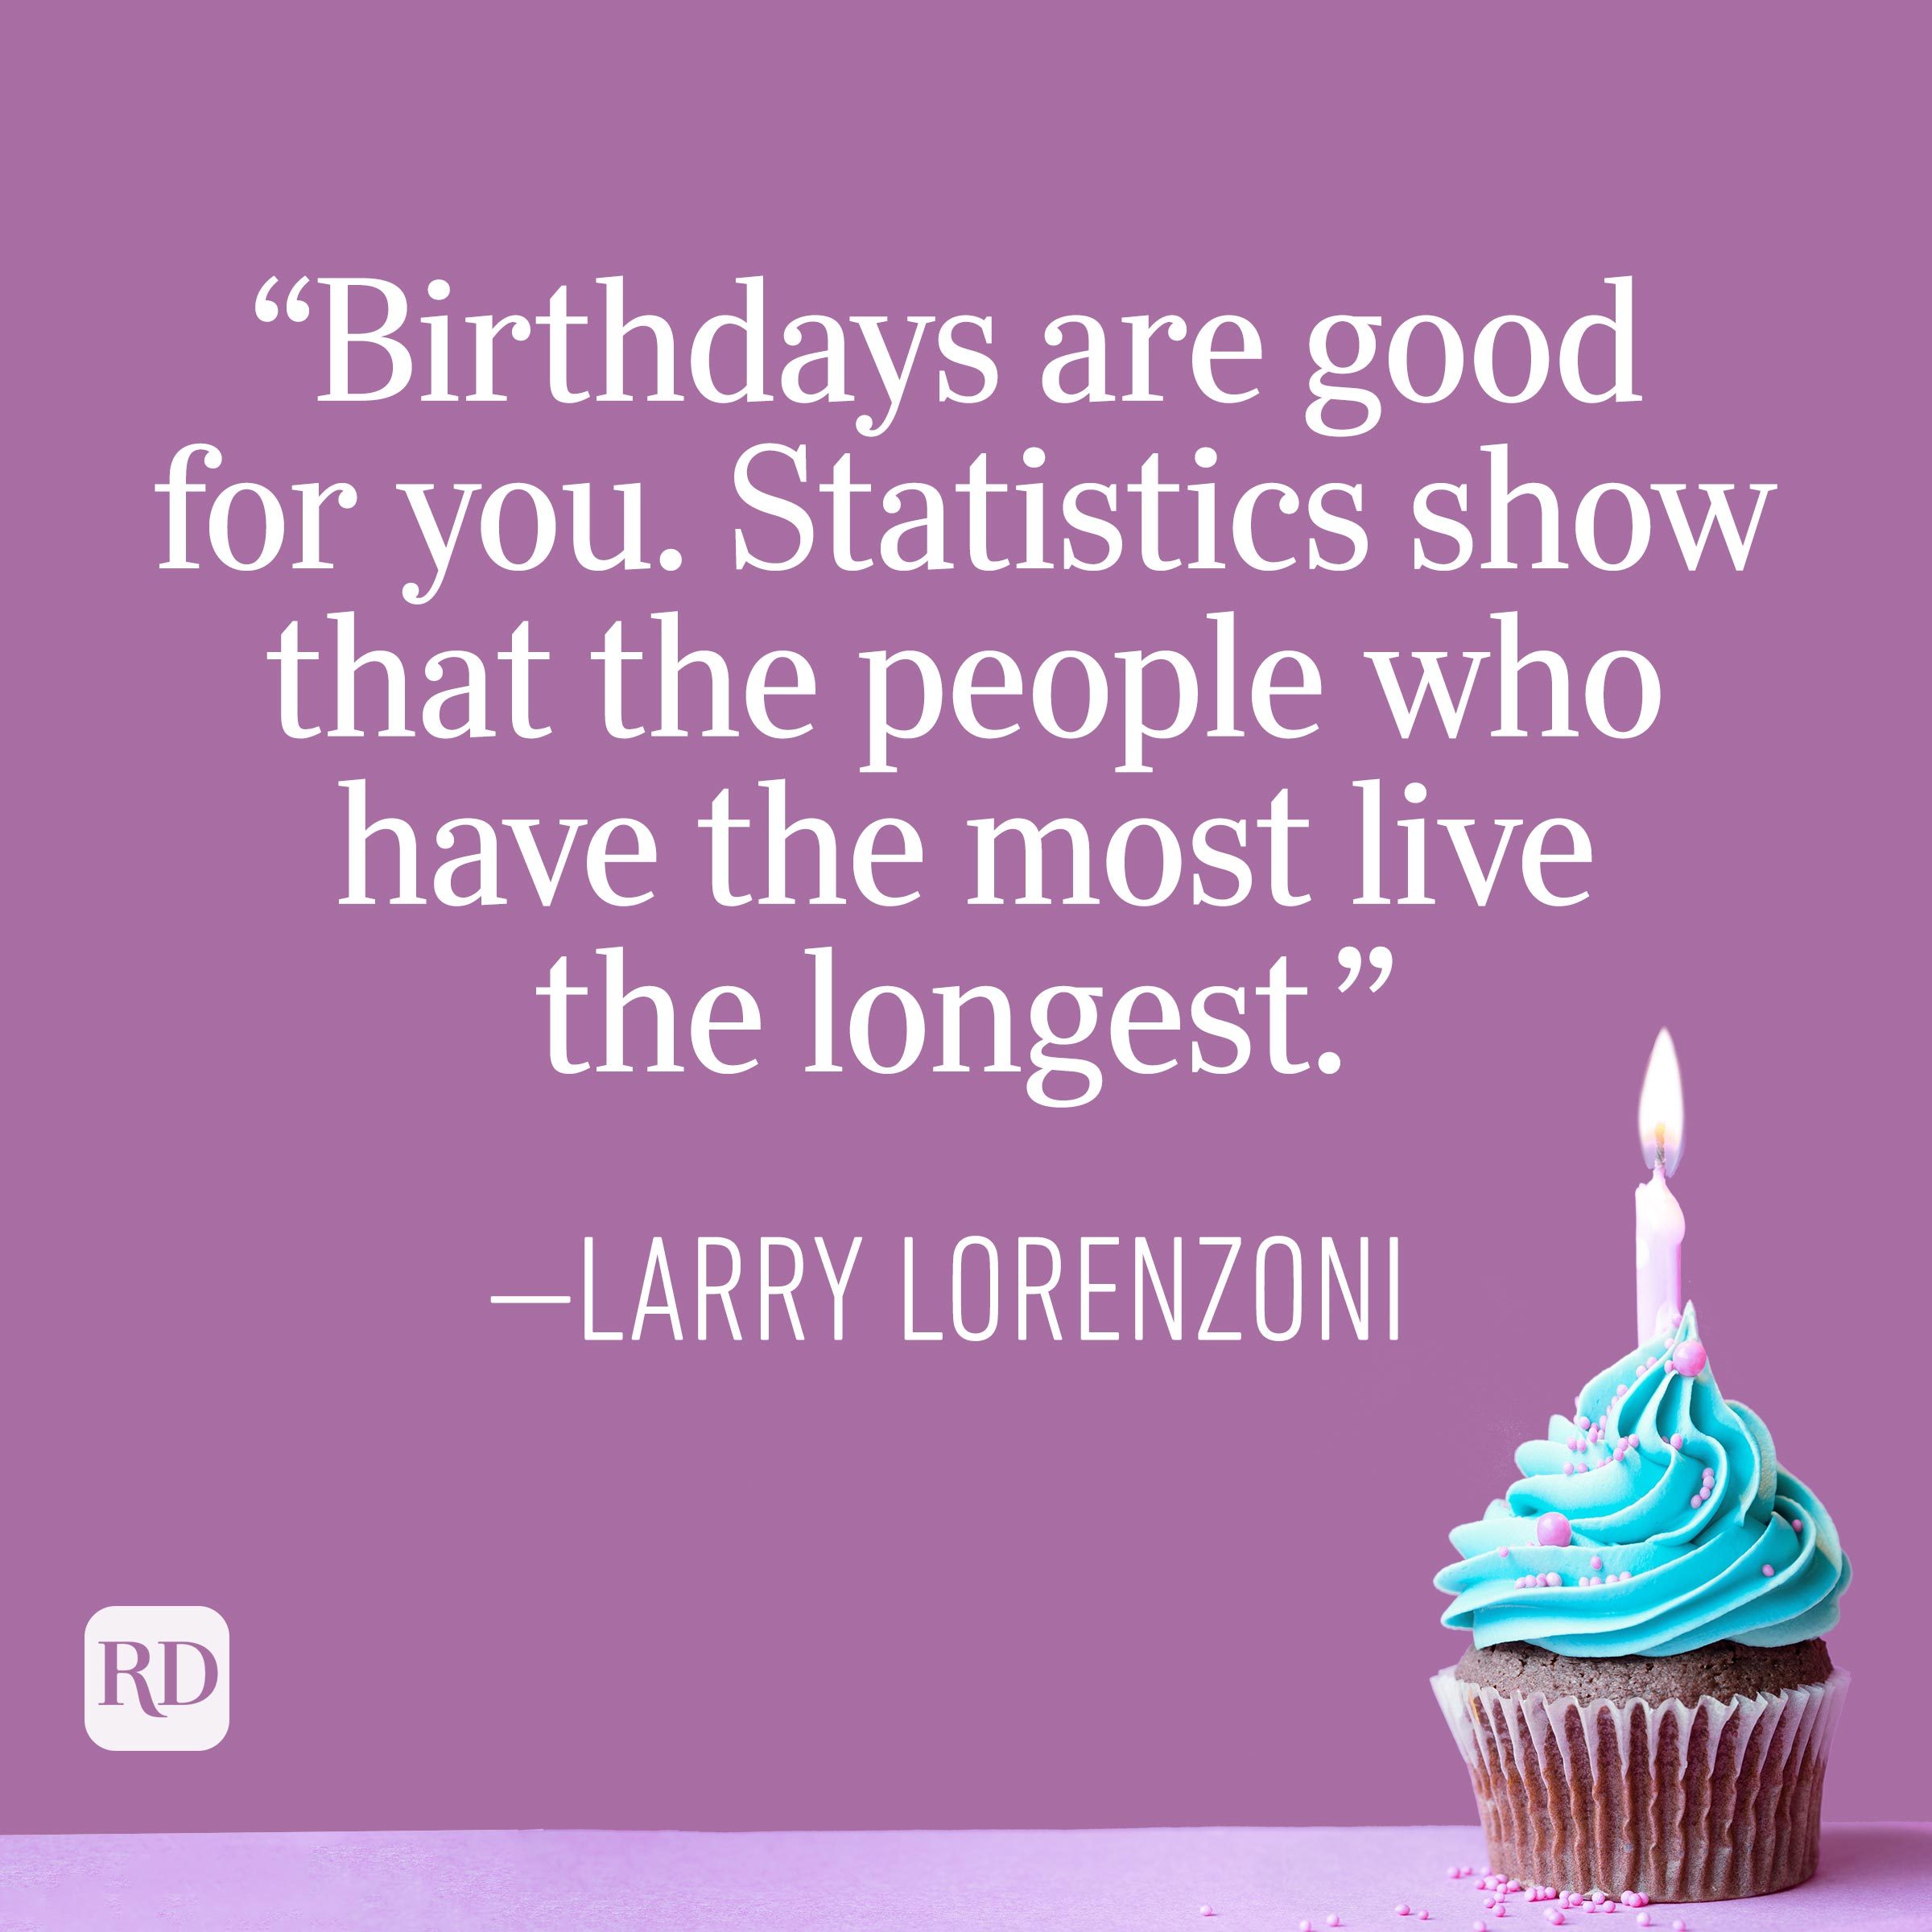 "Birthdays are good for you. Statistics show that the people who have the most live the longest." —Larry Lorenzoni